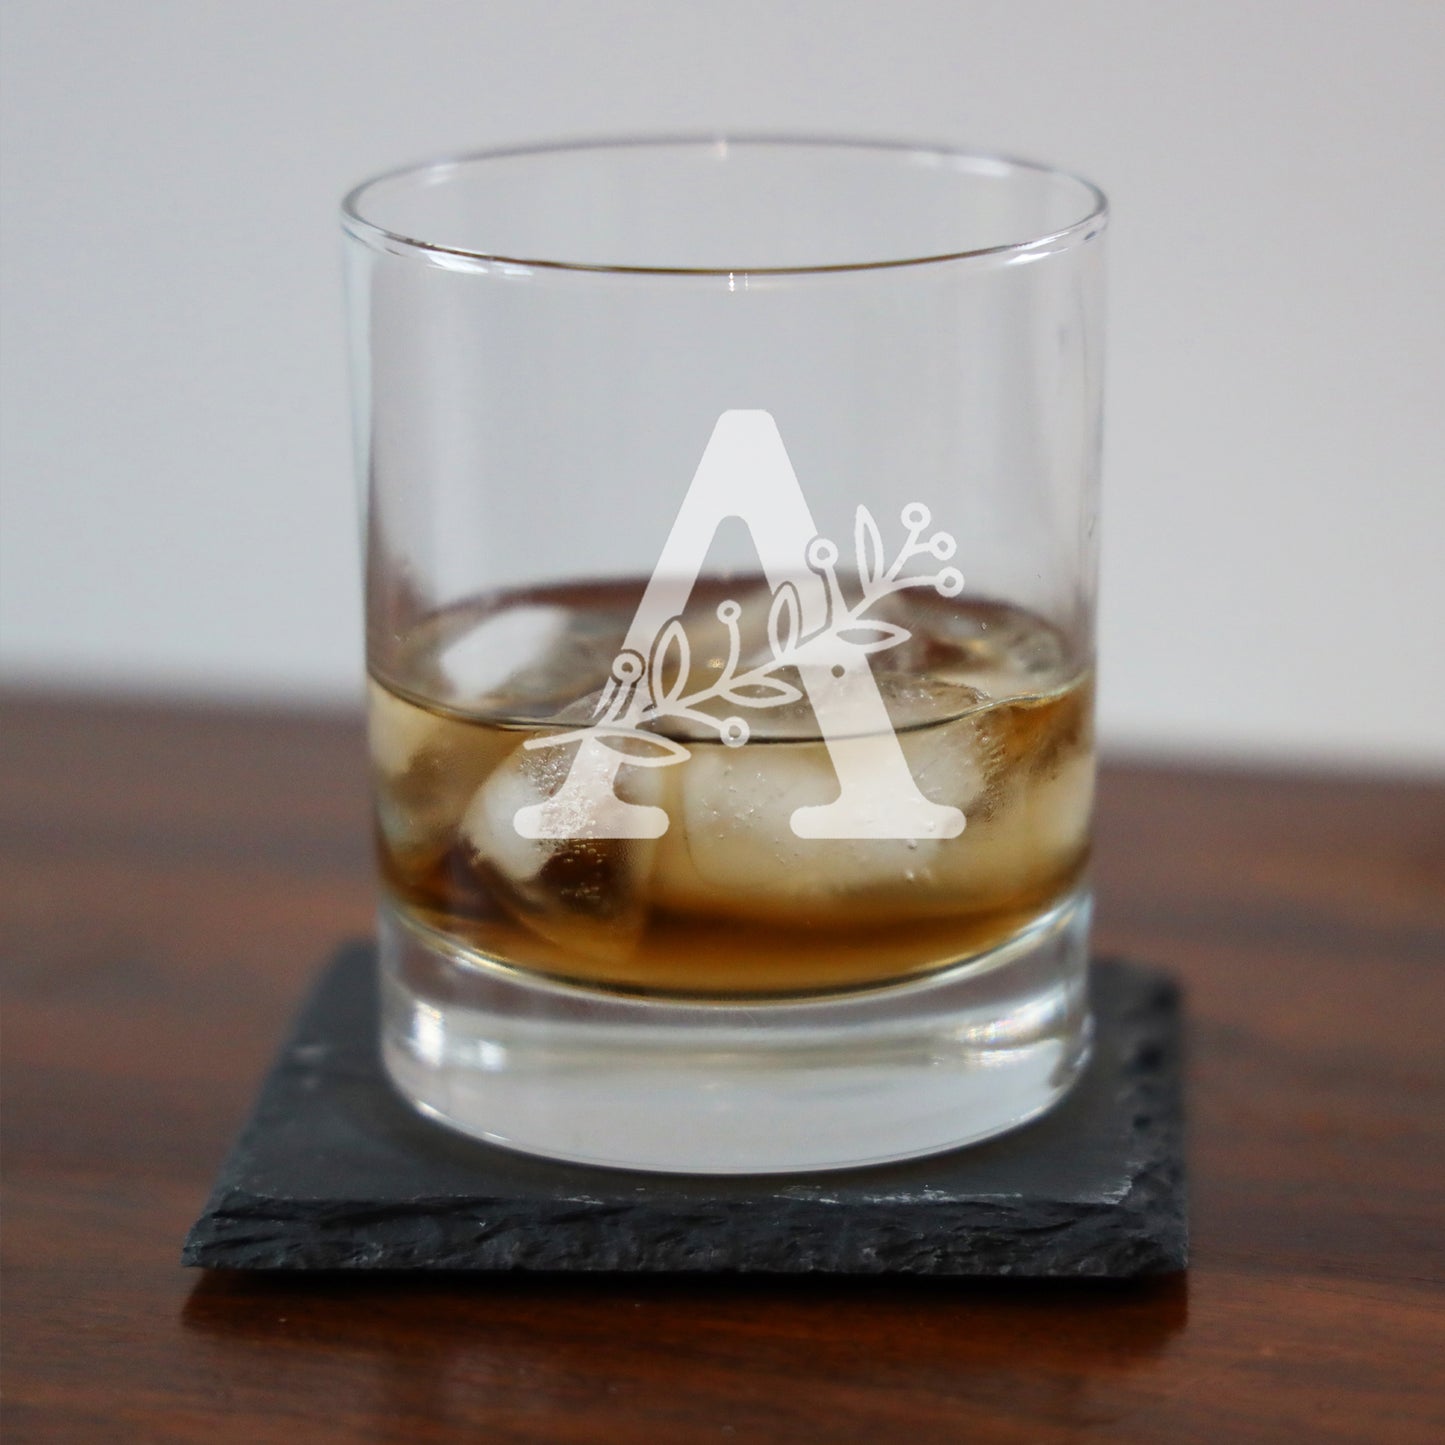 Personalised Engraved Monogram Initial Design Whisky Glass and/or Coaster Gift  - Always Looking Good - Glass & Square Coaster  